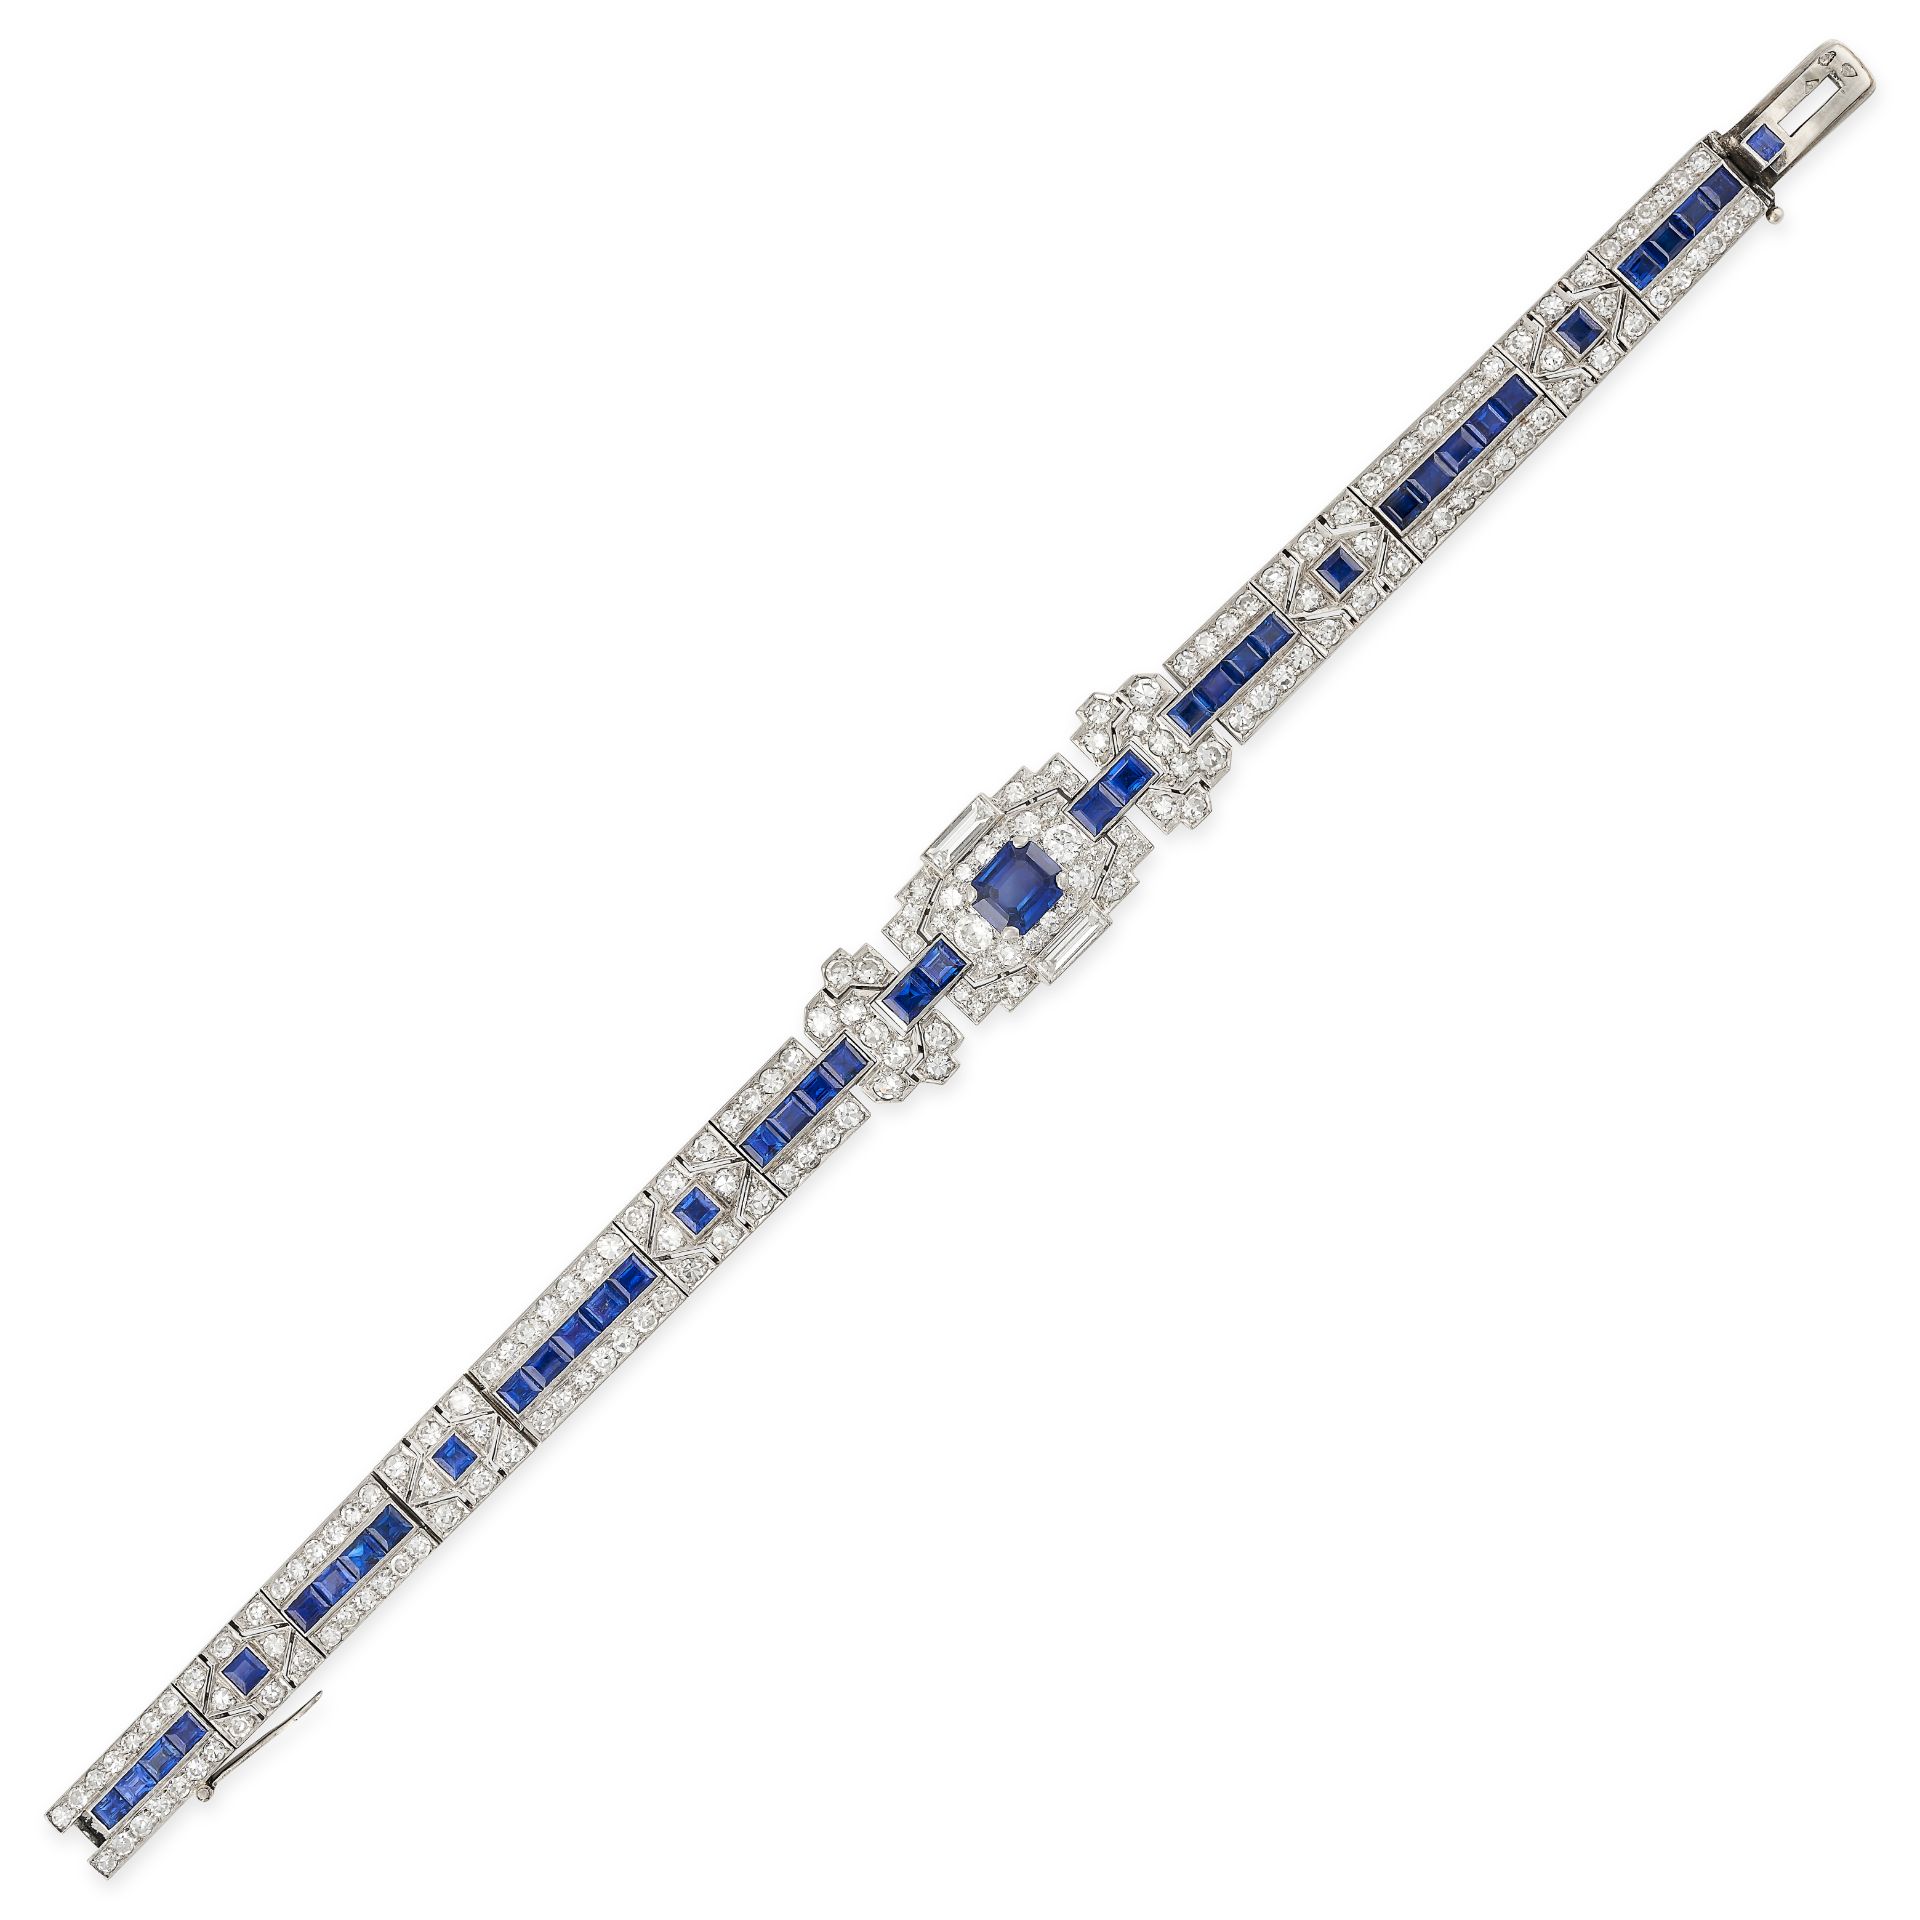 CARTIER, AN ART DECO SAPPHIRE AND DIAMOND BRACELET in platinum and 18ct white gold, the central